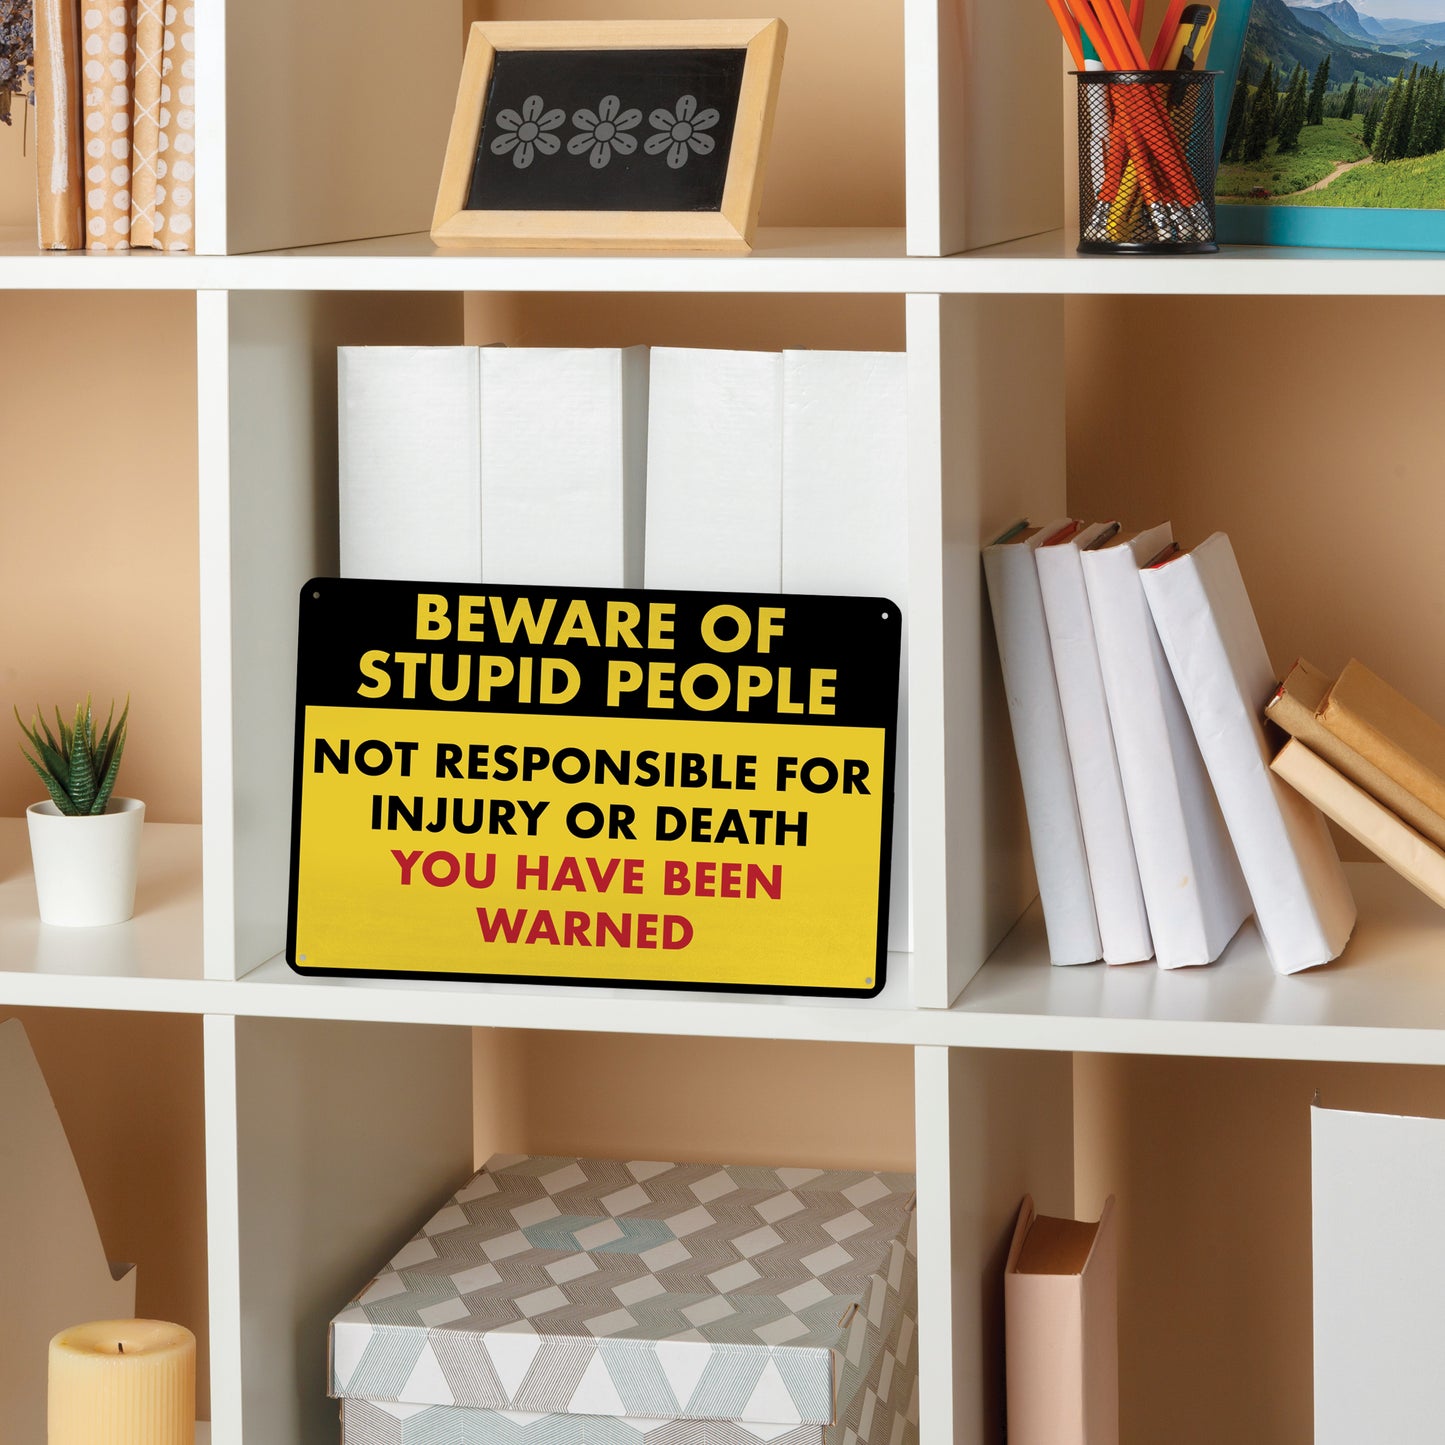 Beware of Stupid People - 8" x 12" Funny Metal Sign